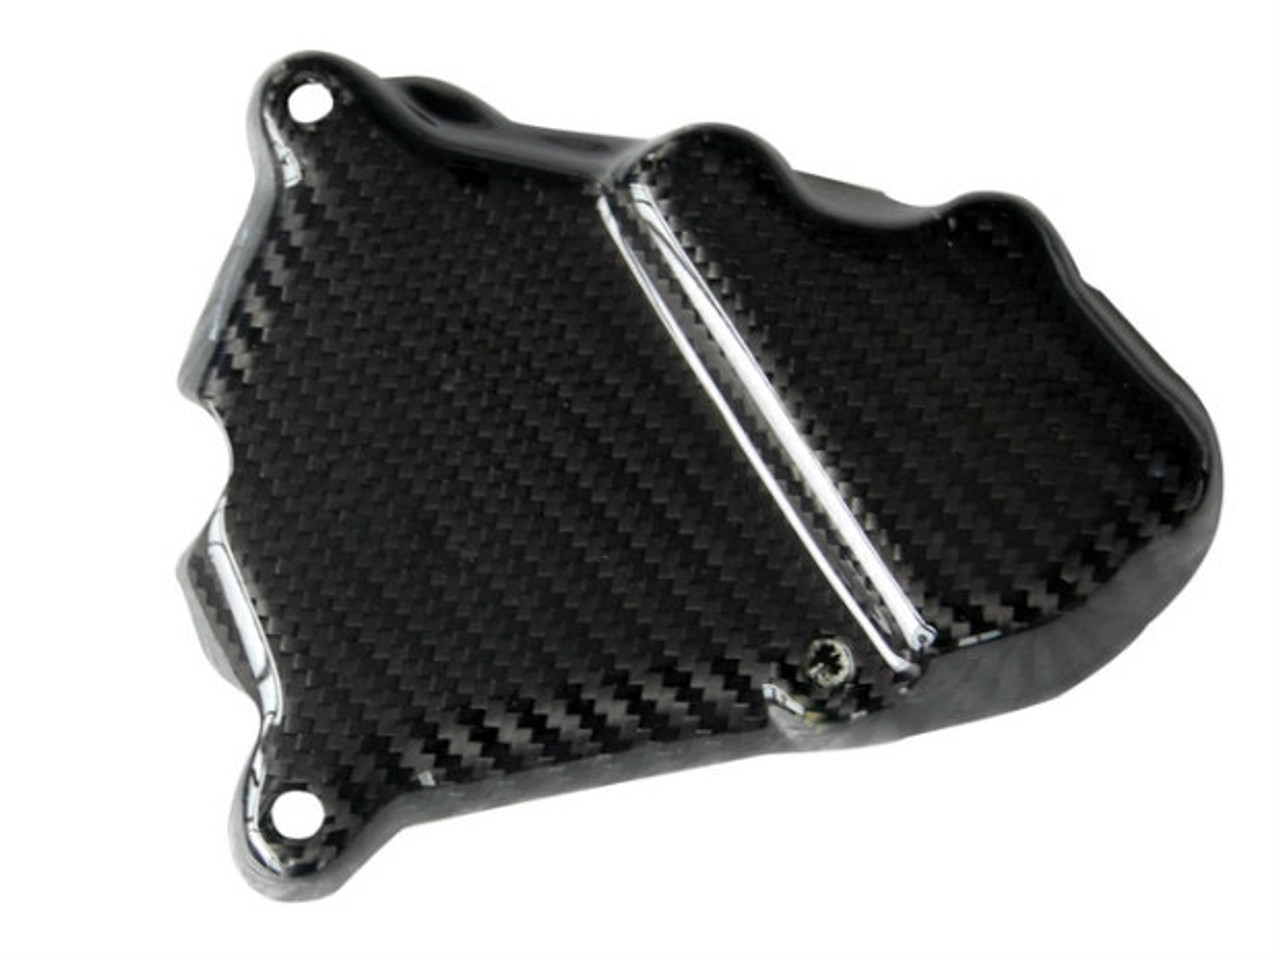 Ignition Cover Guard in Glossy Twill Weave Carbon Fiber for BMW S1000RR, S1000R, S1000XR